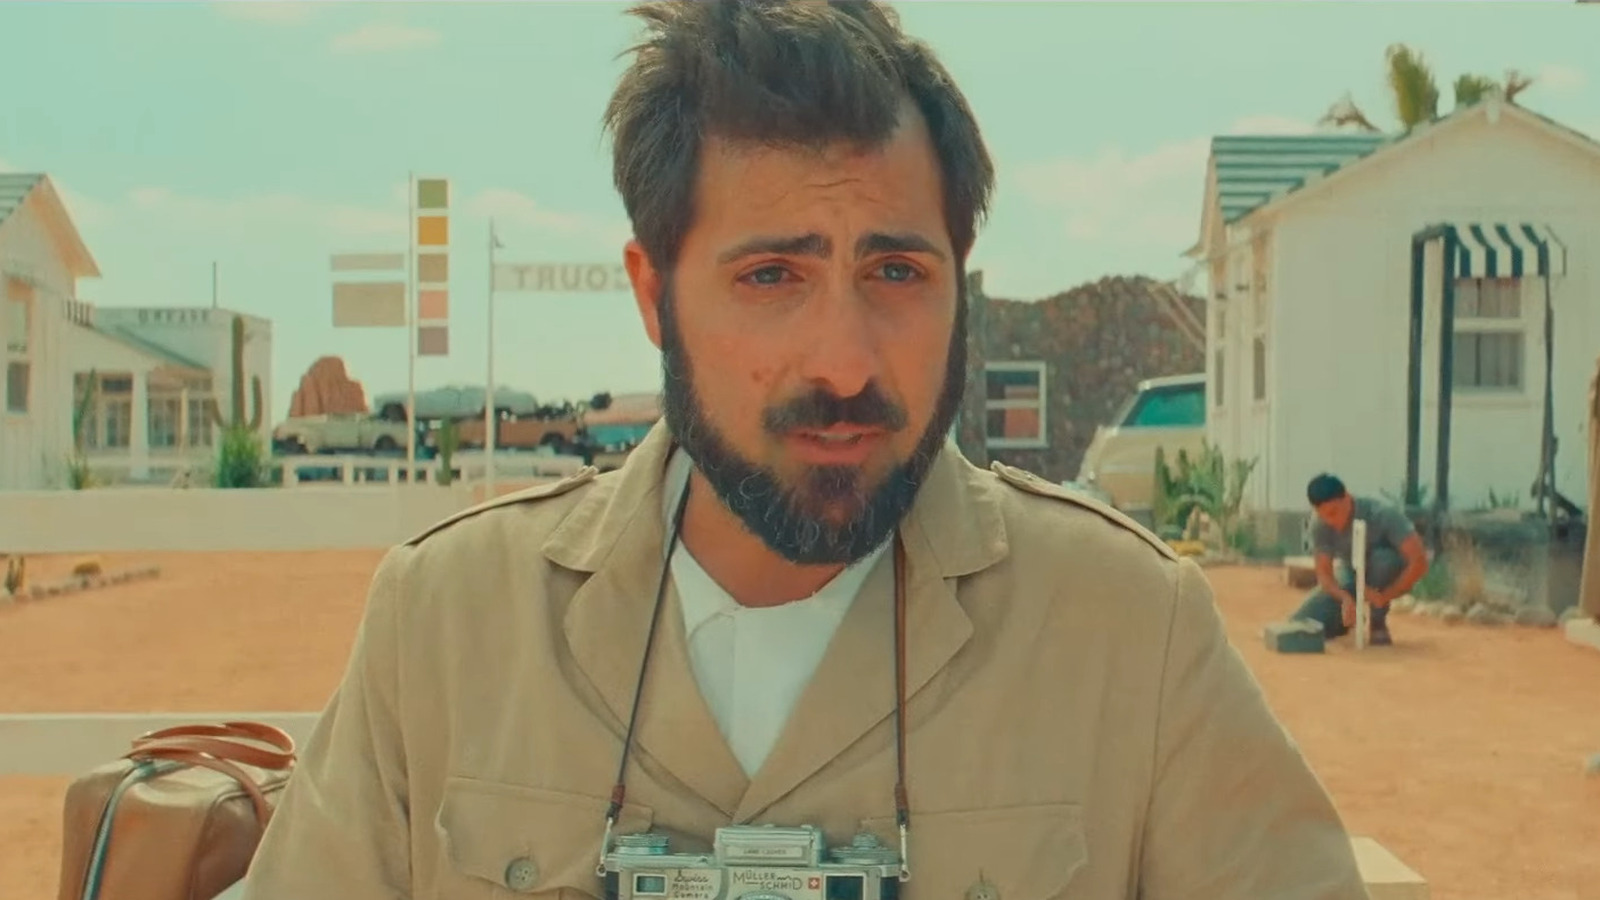 The First Trailer For Asteroid City Is About As Wes Anderson As It Gets